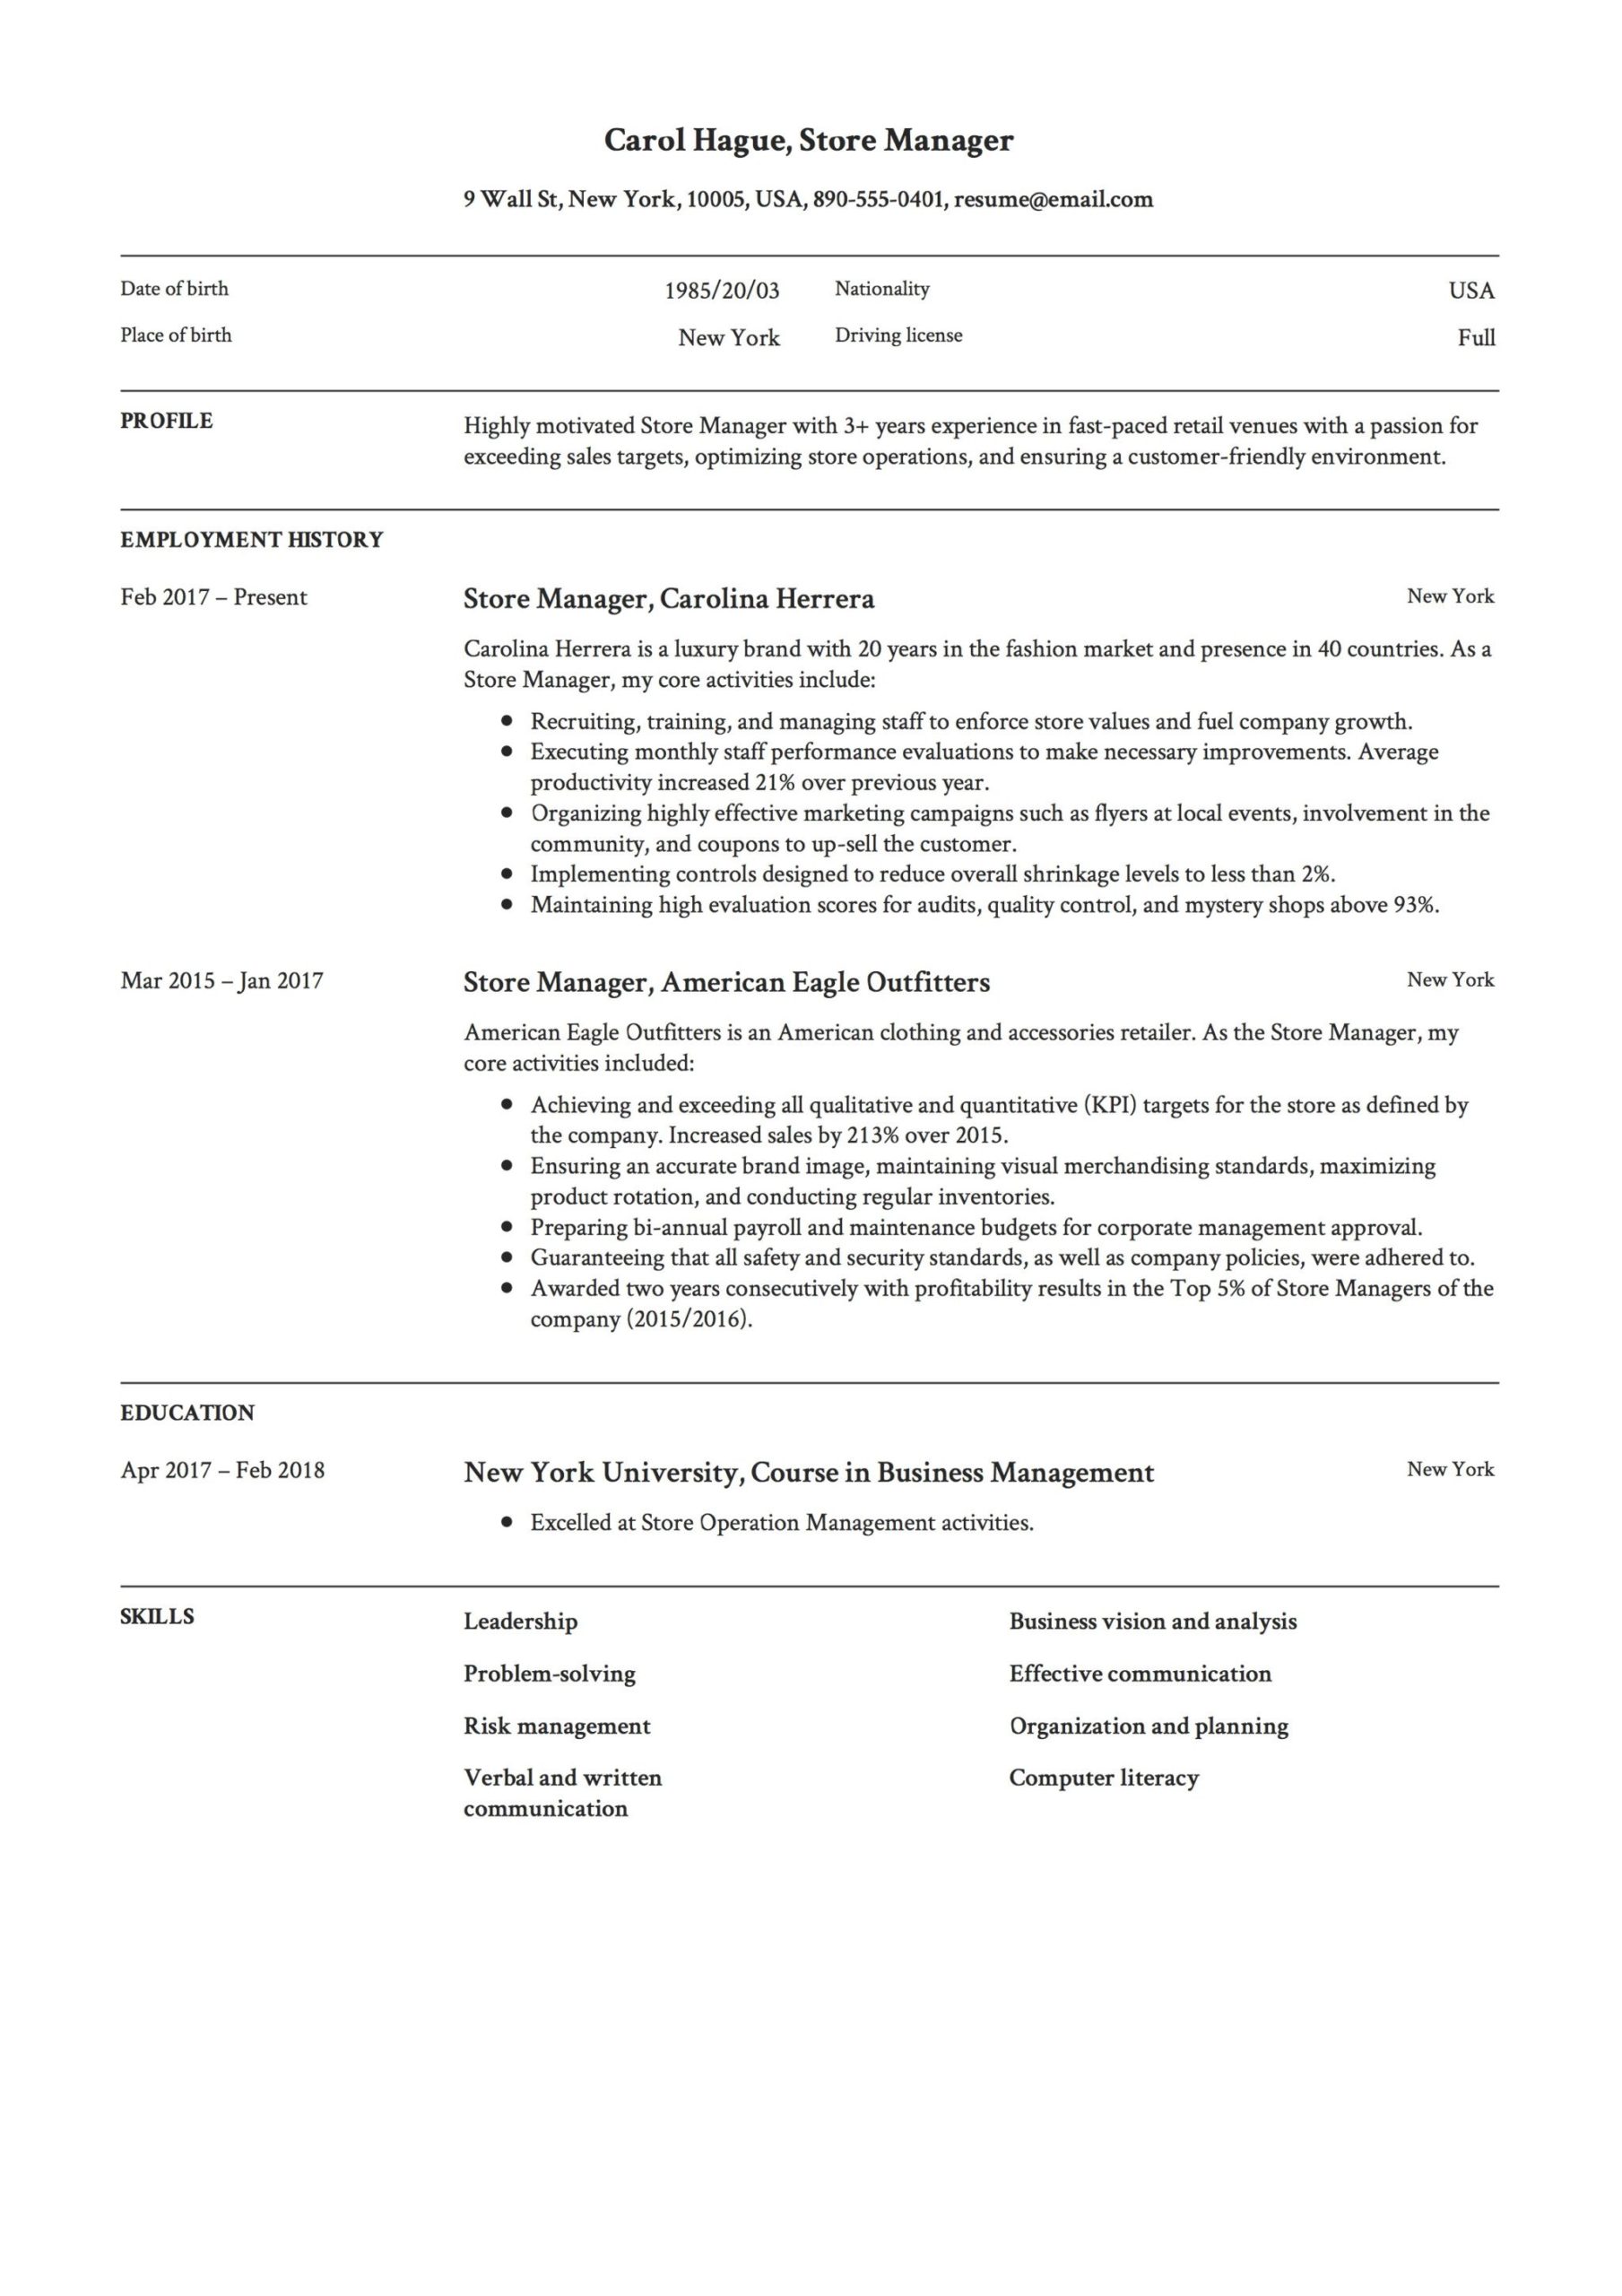 Sample Skill Resume for Retail Department Manager Store Manager Resume & Guide 12 Templates Pdf 2021